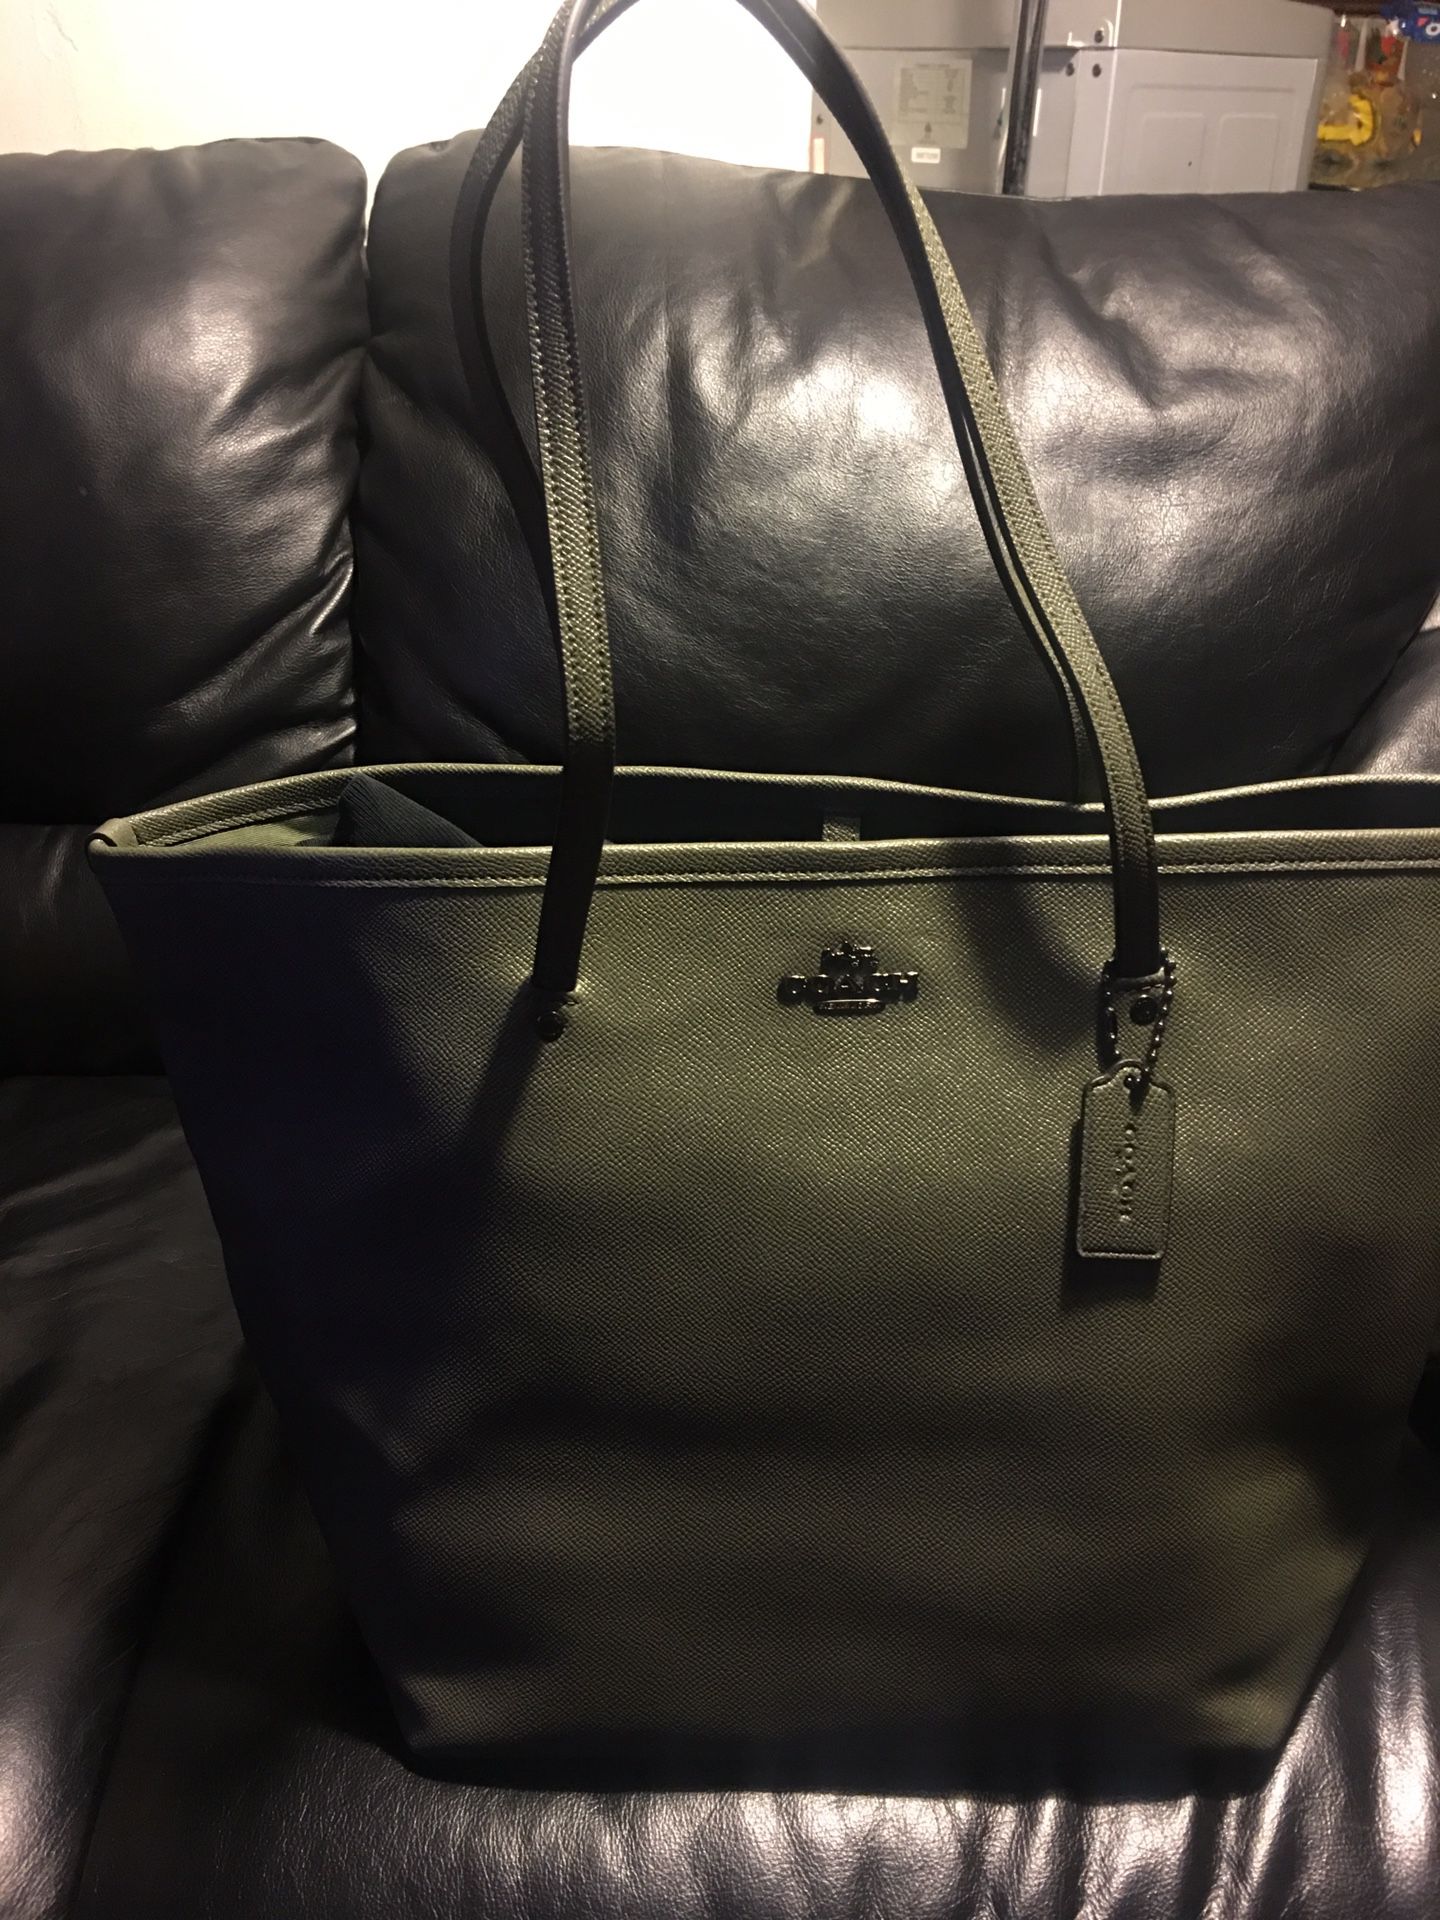 new coach bag olive green very nice large size